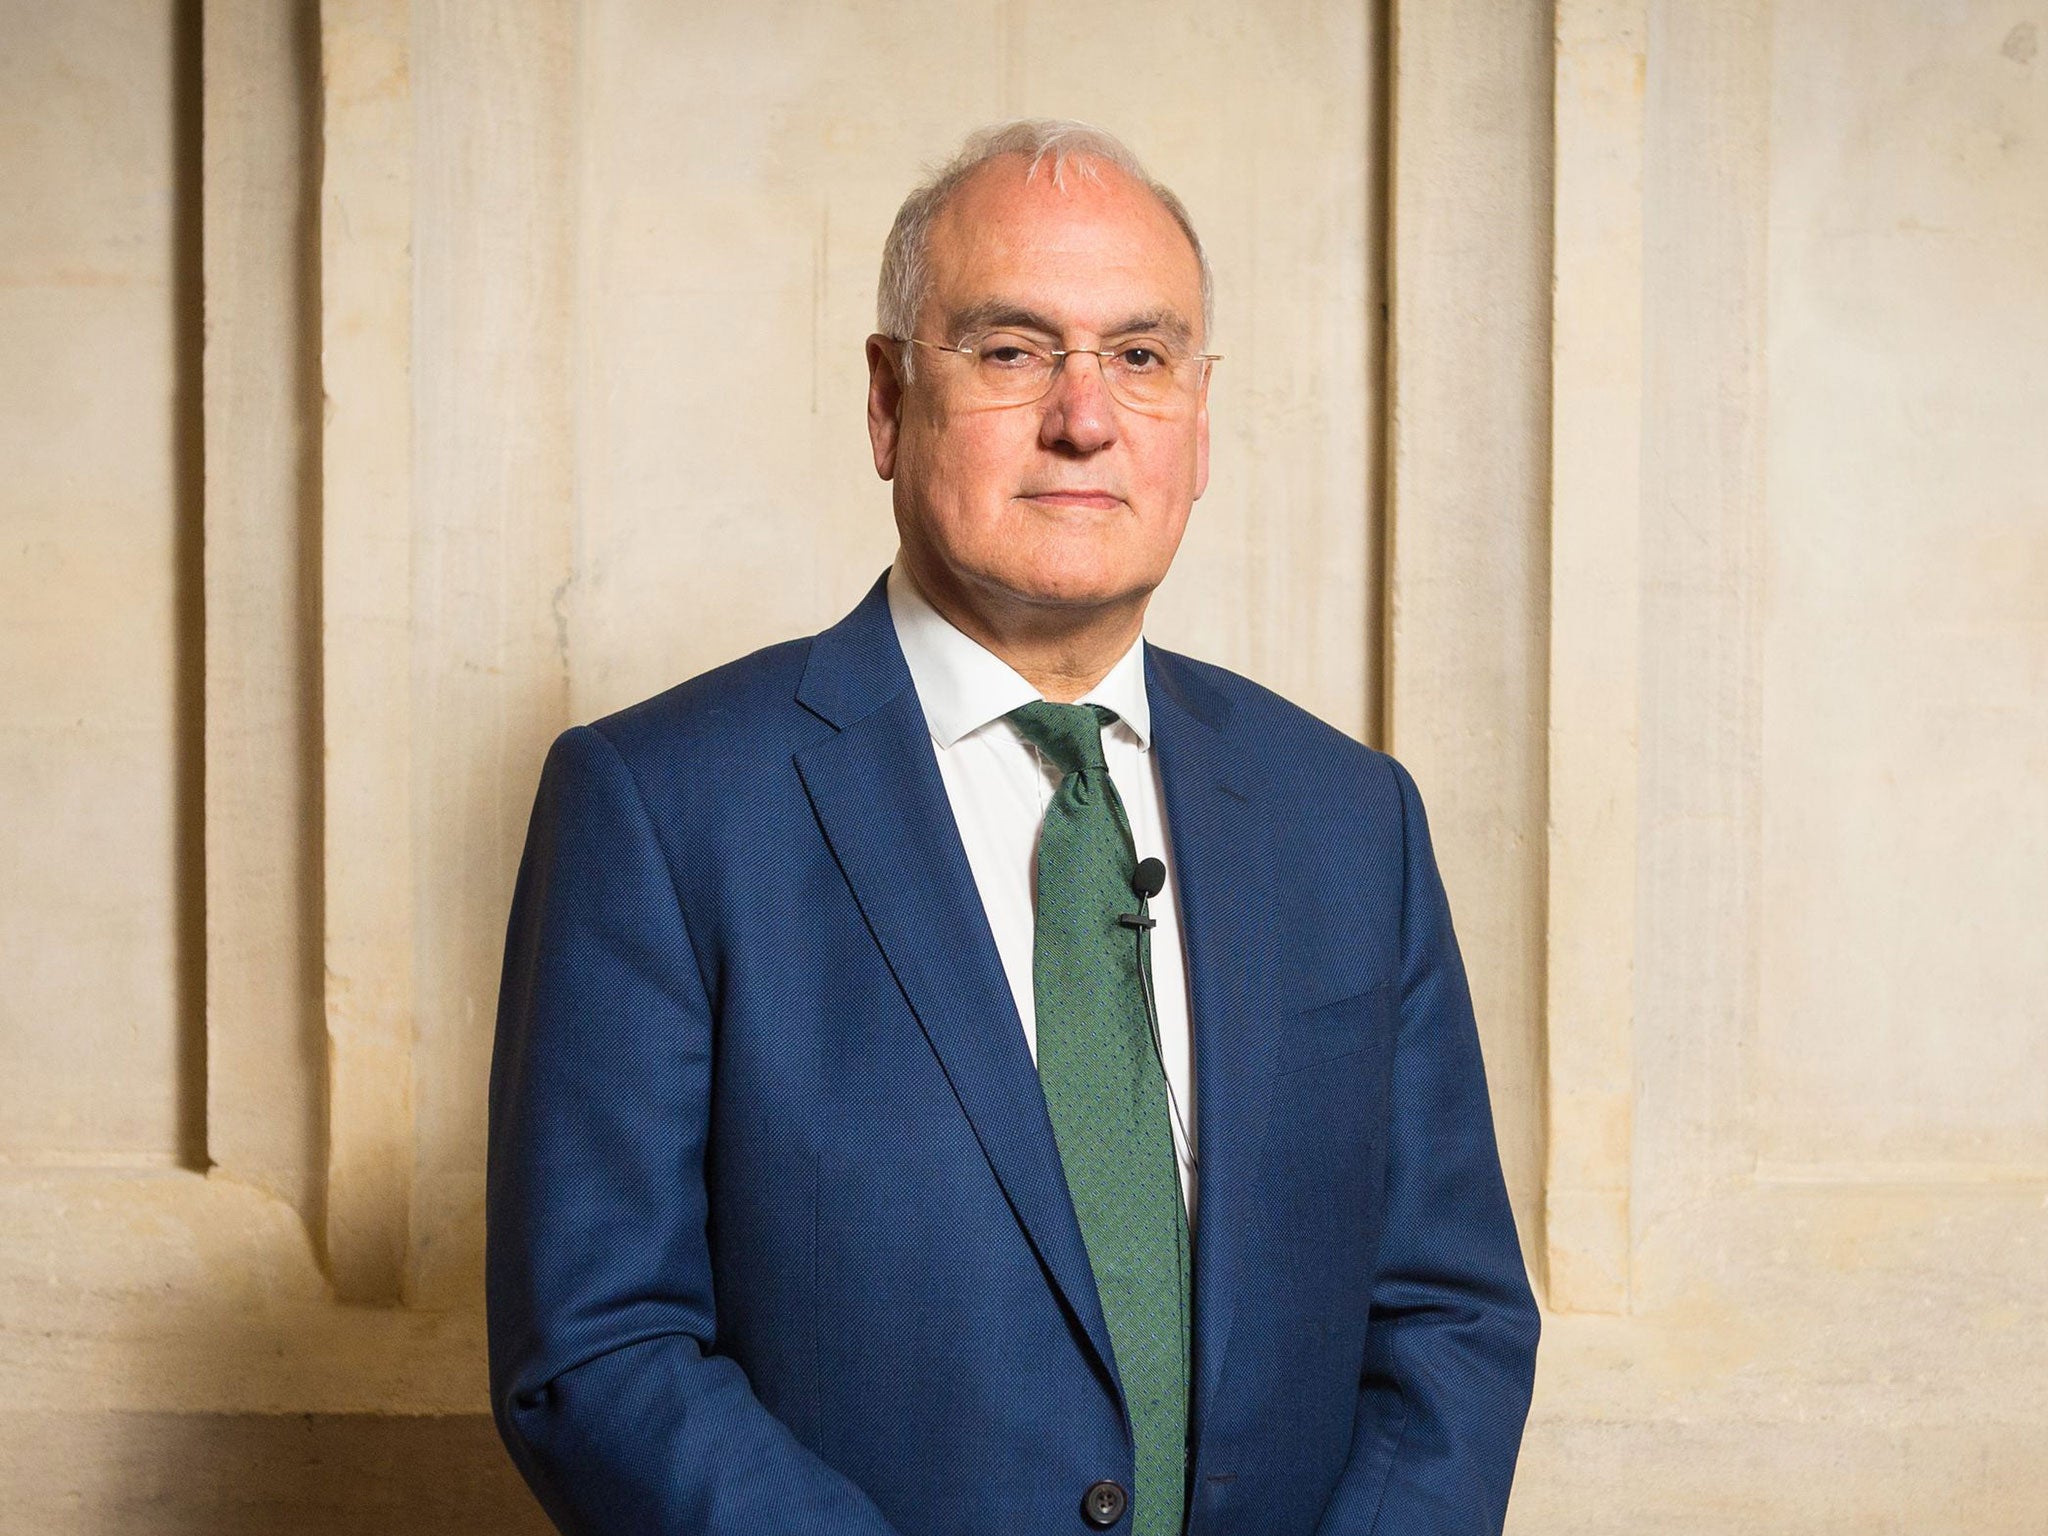 Sir Michael Wilshaw said the figures were indicative of a growing divide between the north and south of England